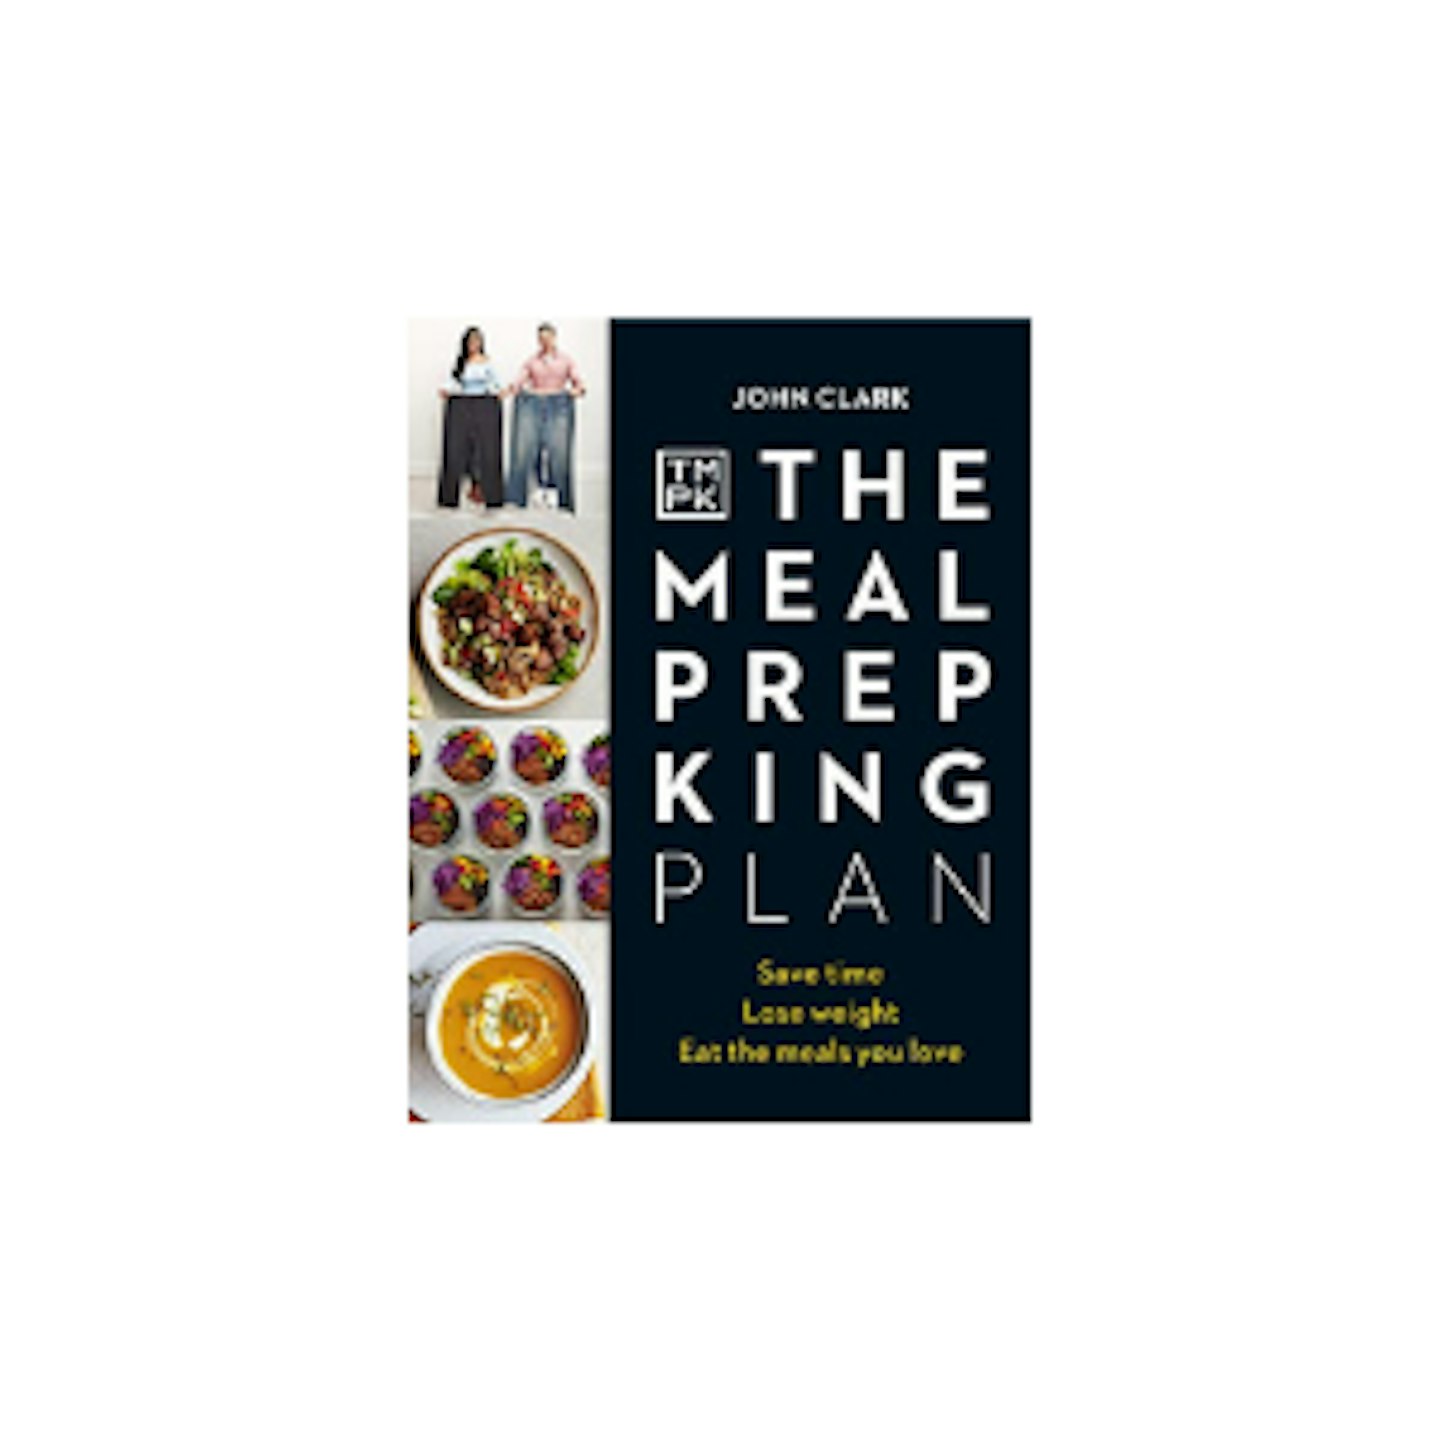 The Meal Prep King Plan: Save time. Lose weight. Eat the meals you love Kindle Edition